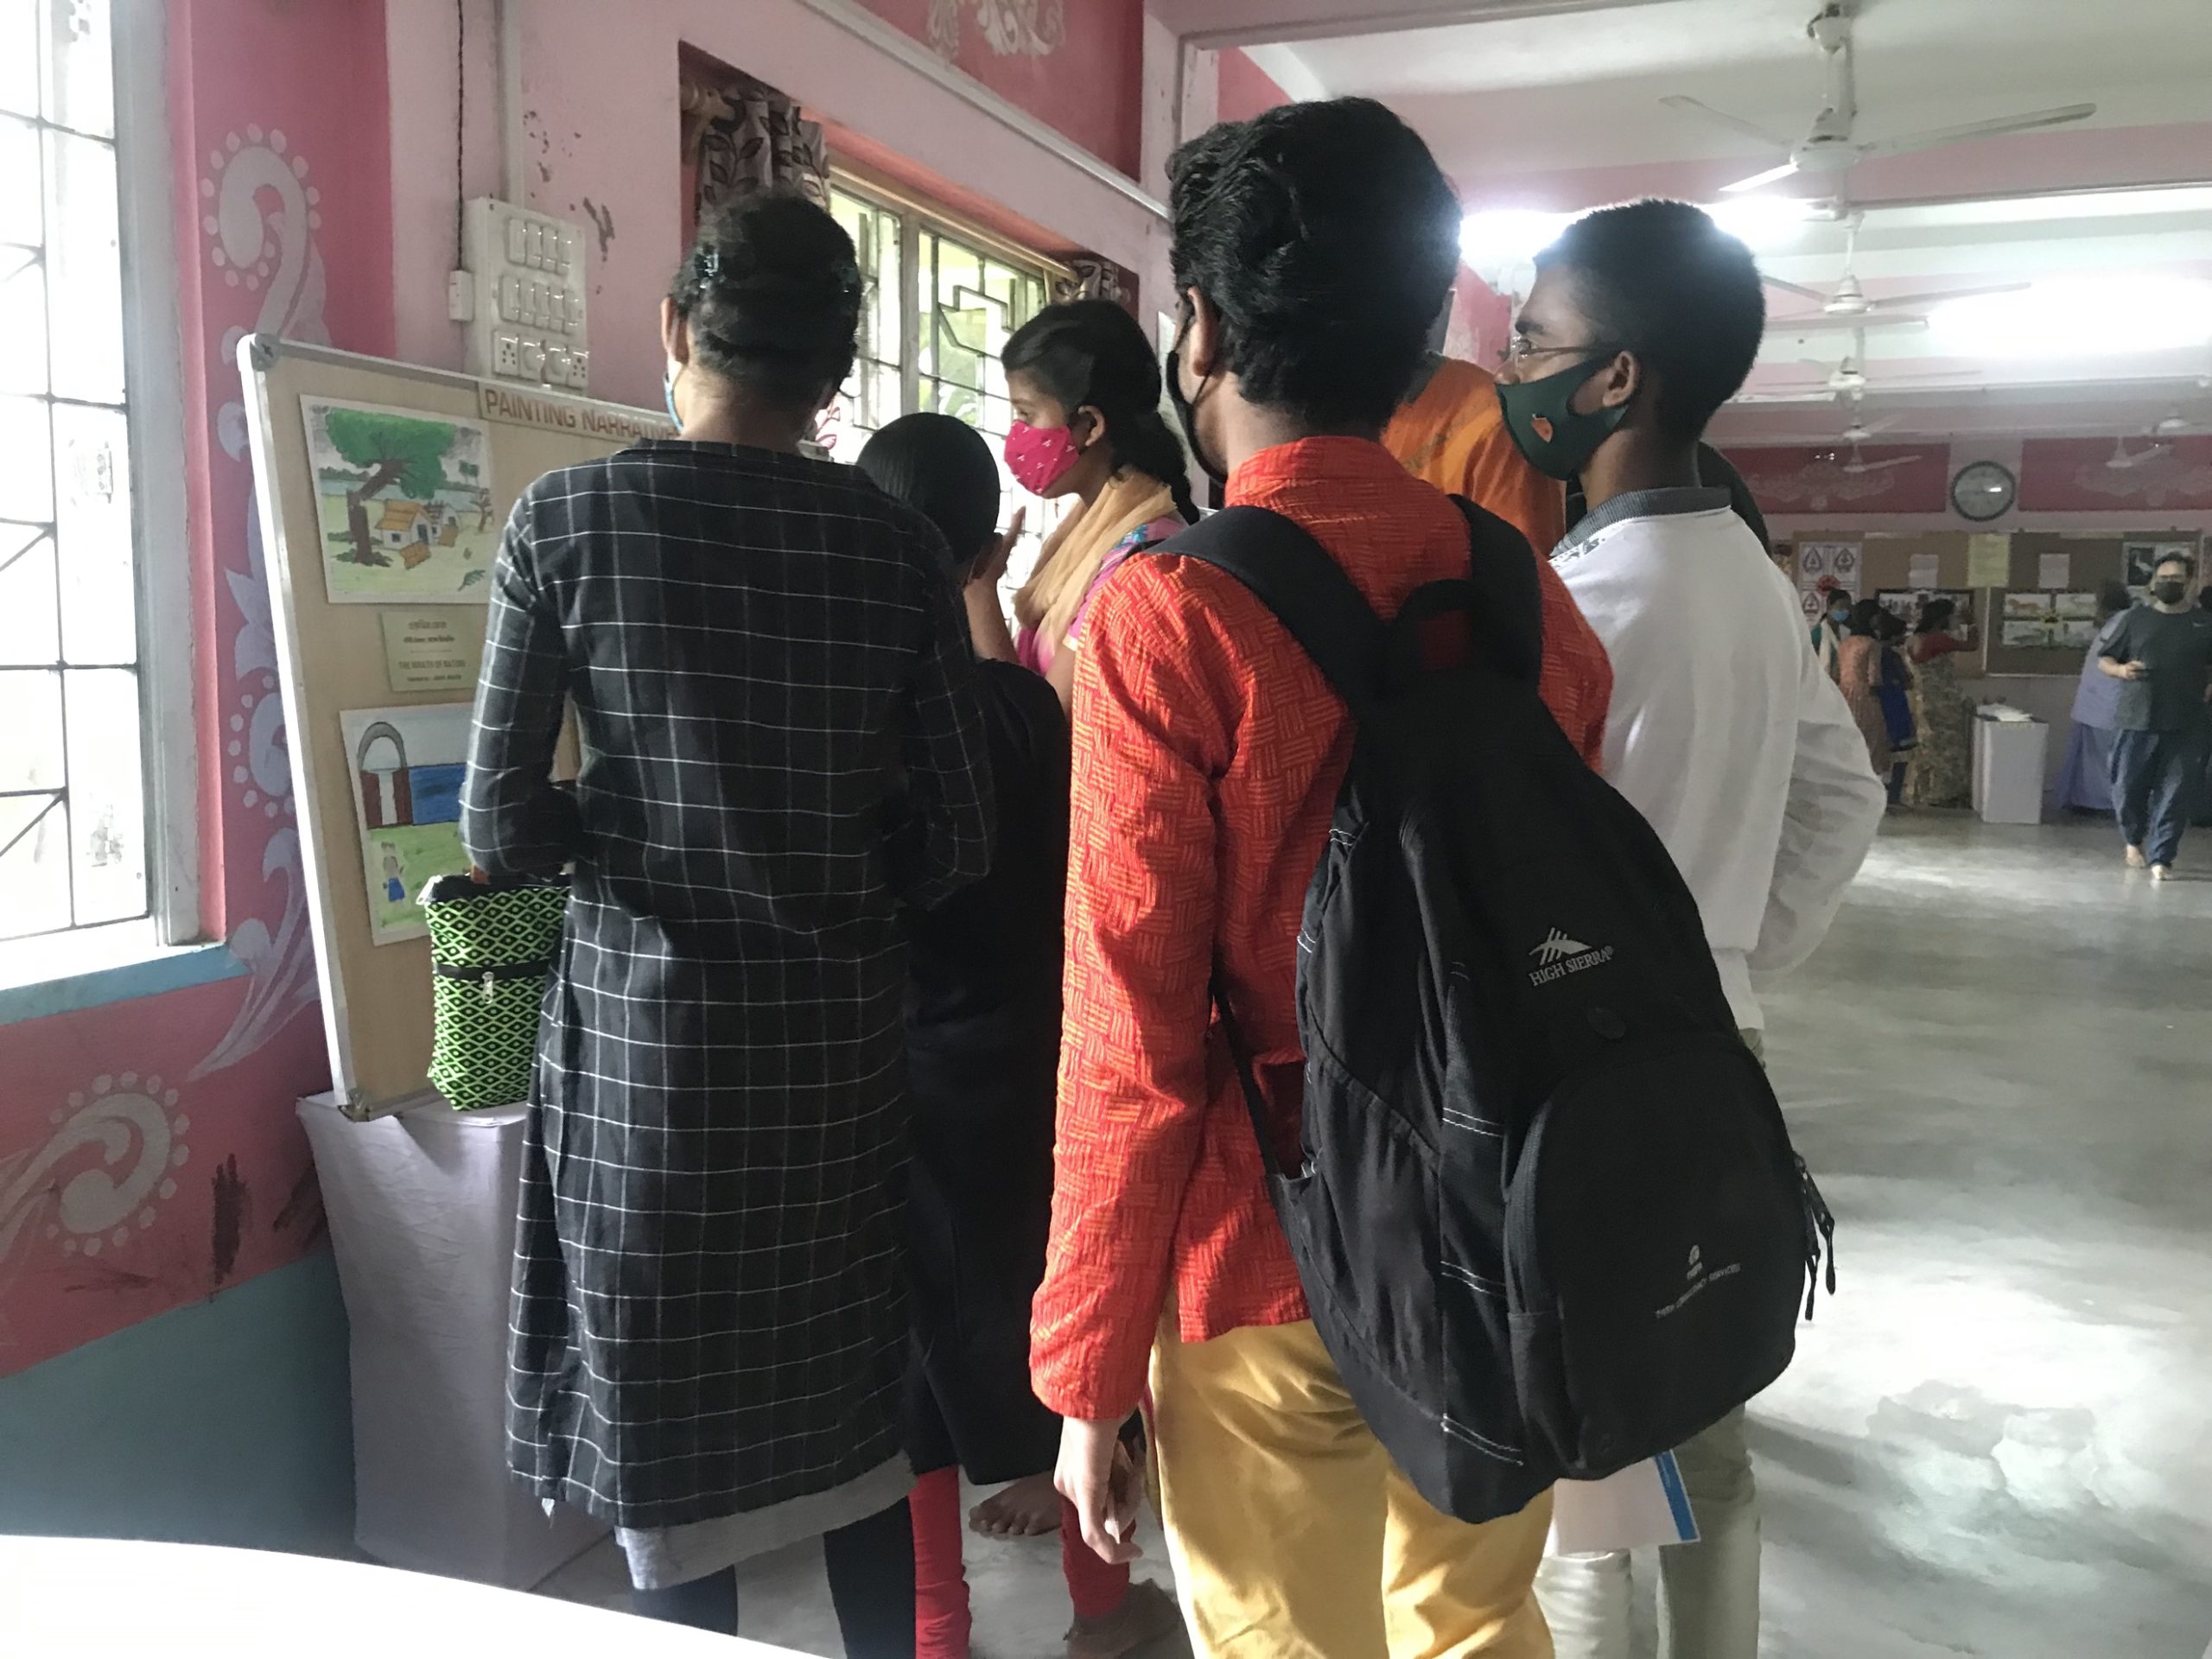 Photograph of a small group of students looking at a board with drawings on it, India